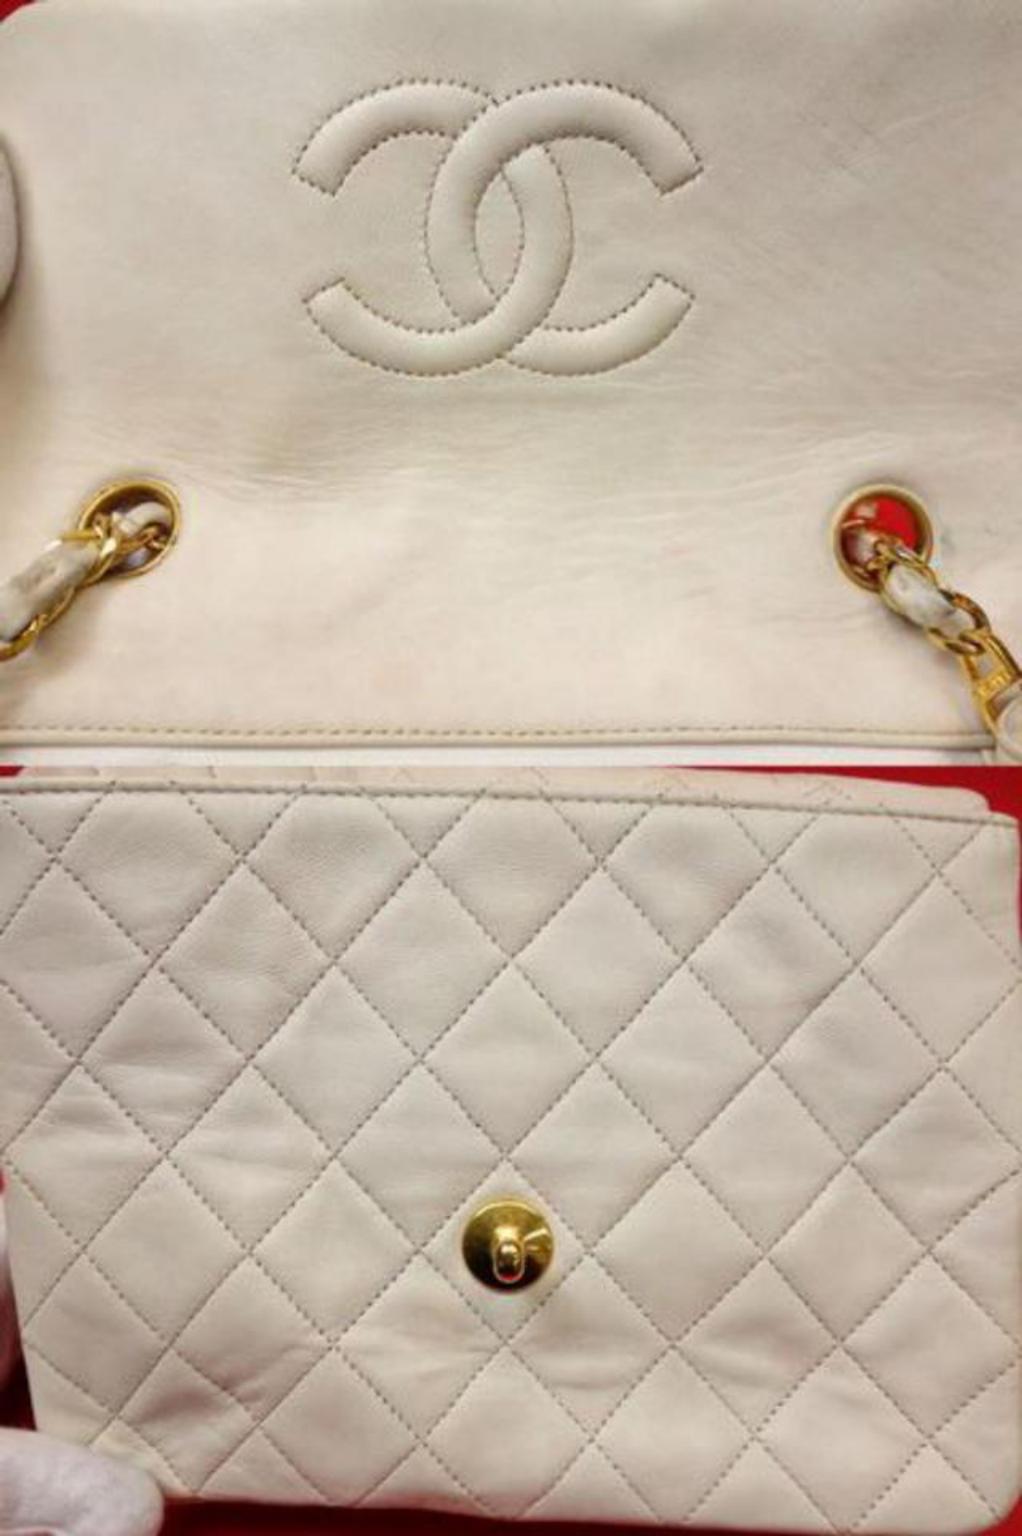 Chanel Classic Flap Small Square 224316 White Leather Shoulder Bag For Sale 1